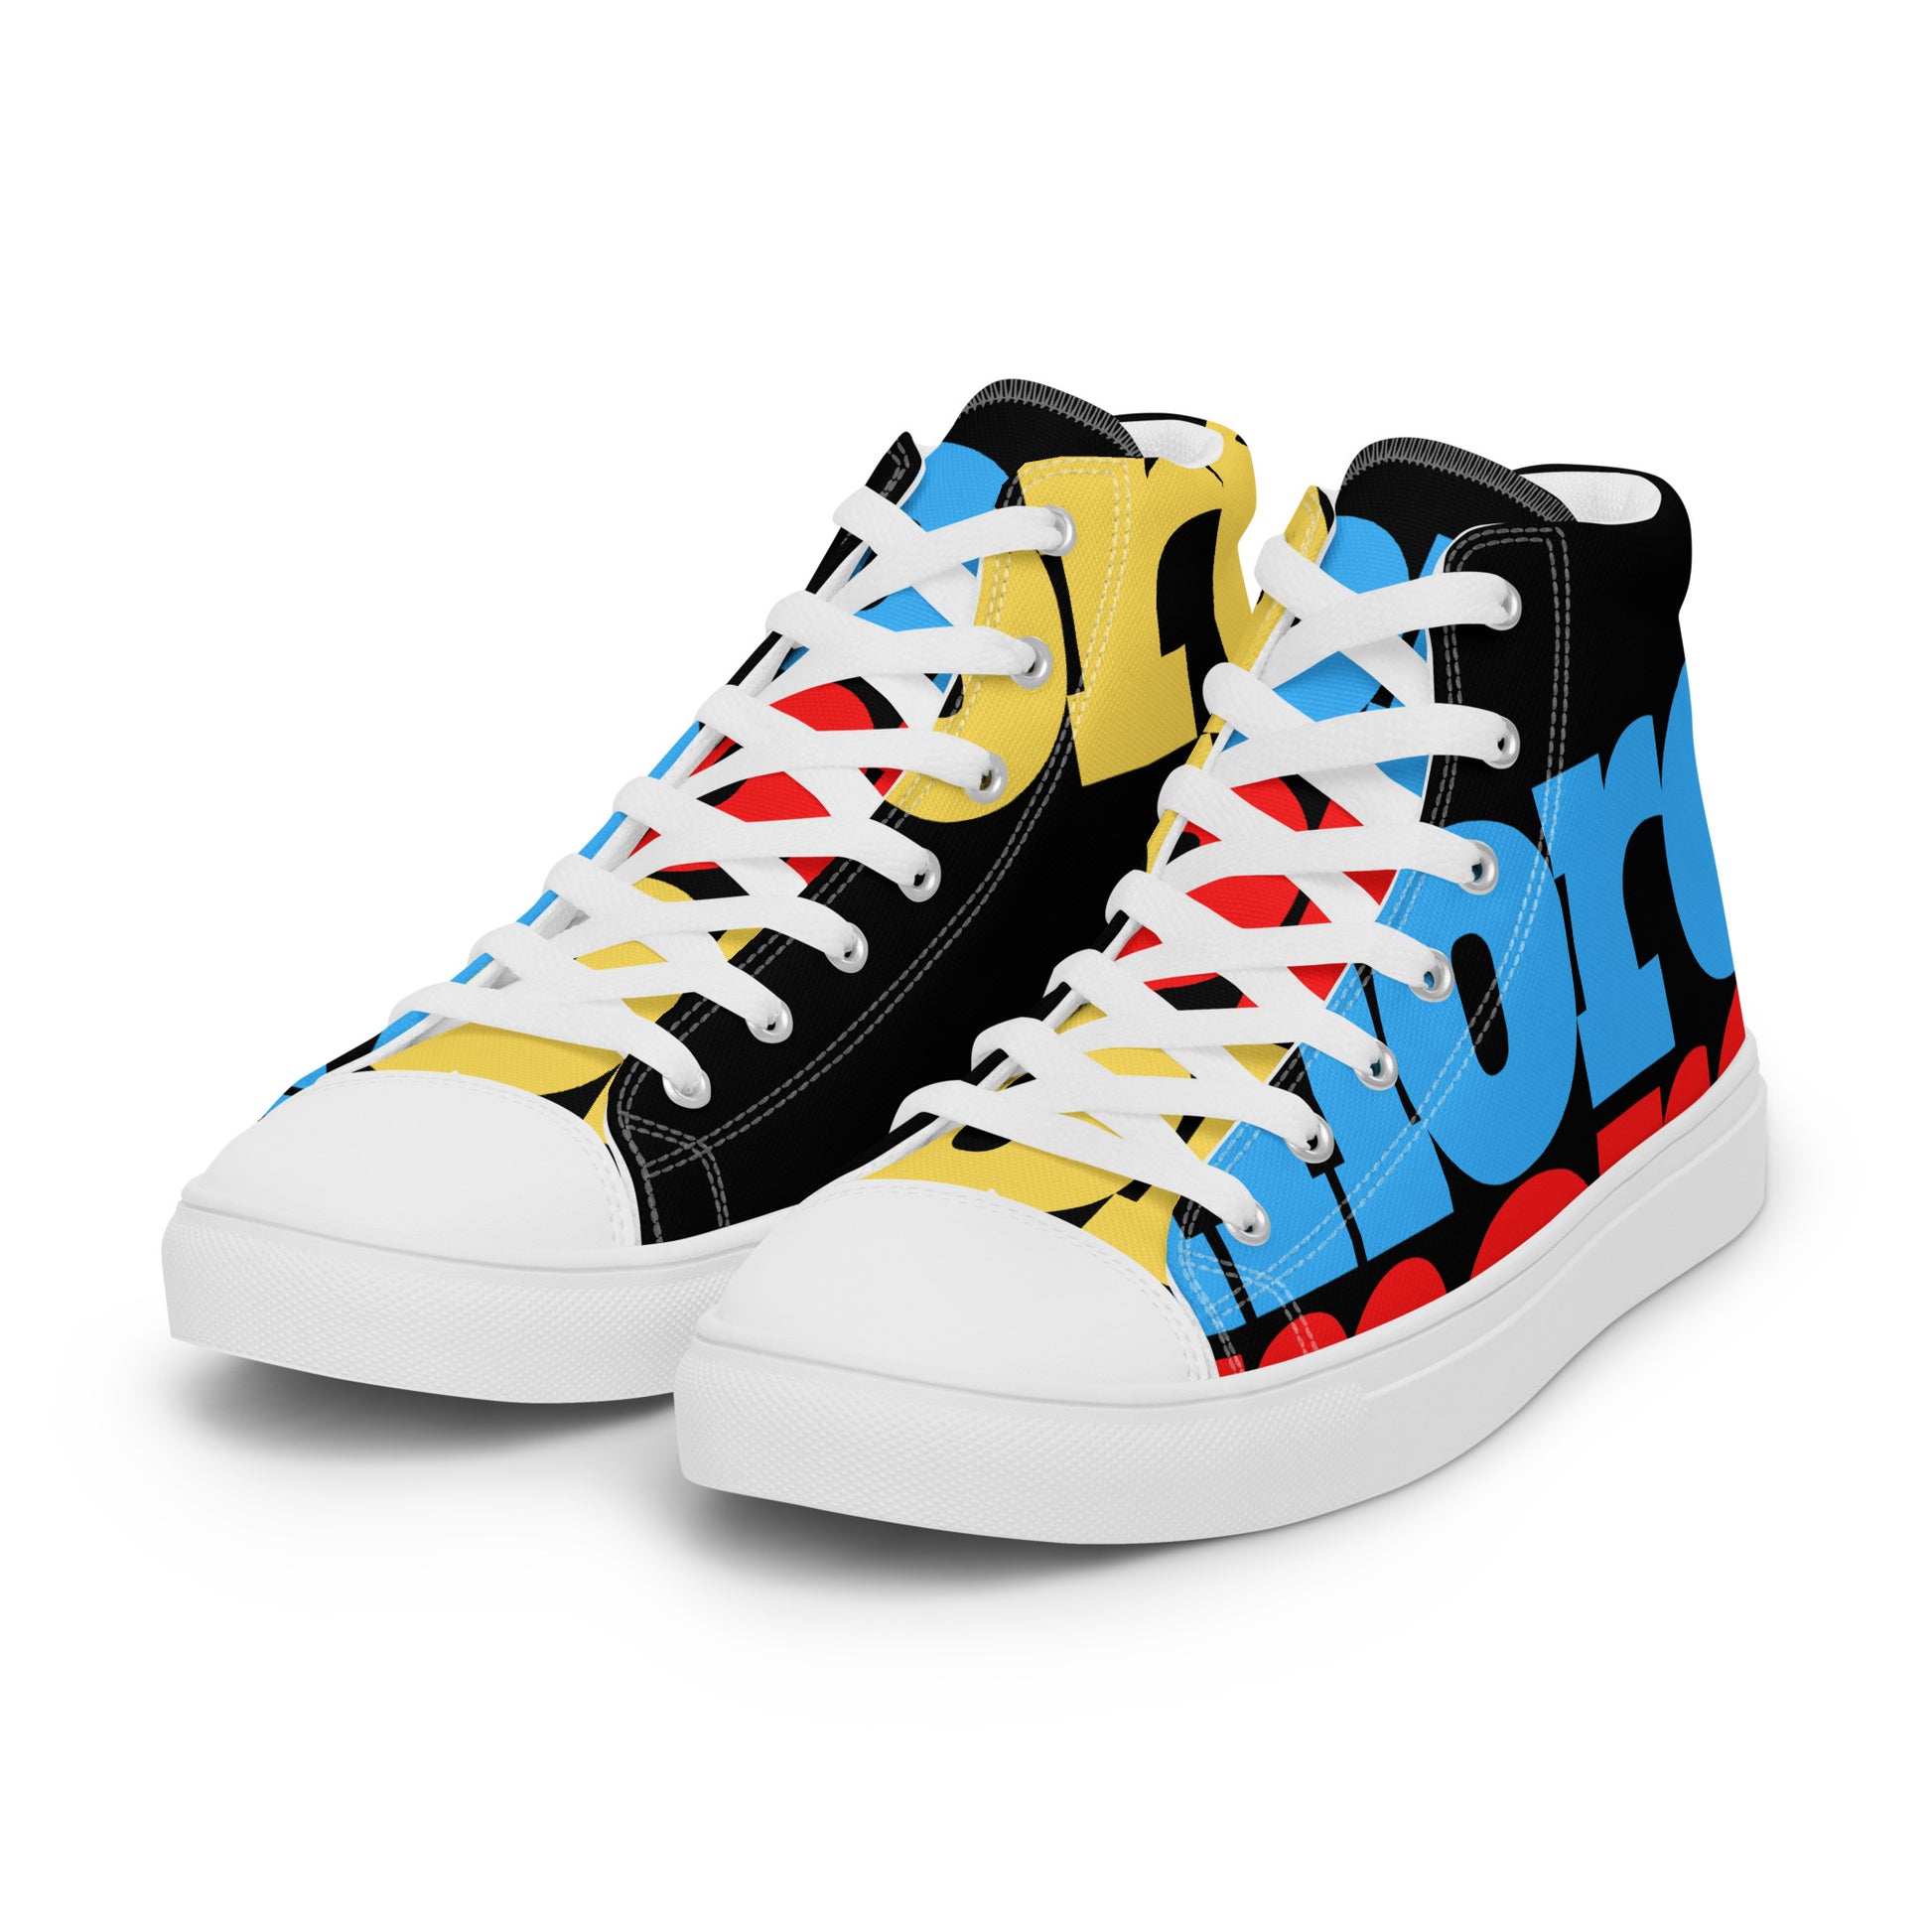 MORE Women’s high top canvas shoes - Beyond The Walls Int'l